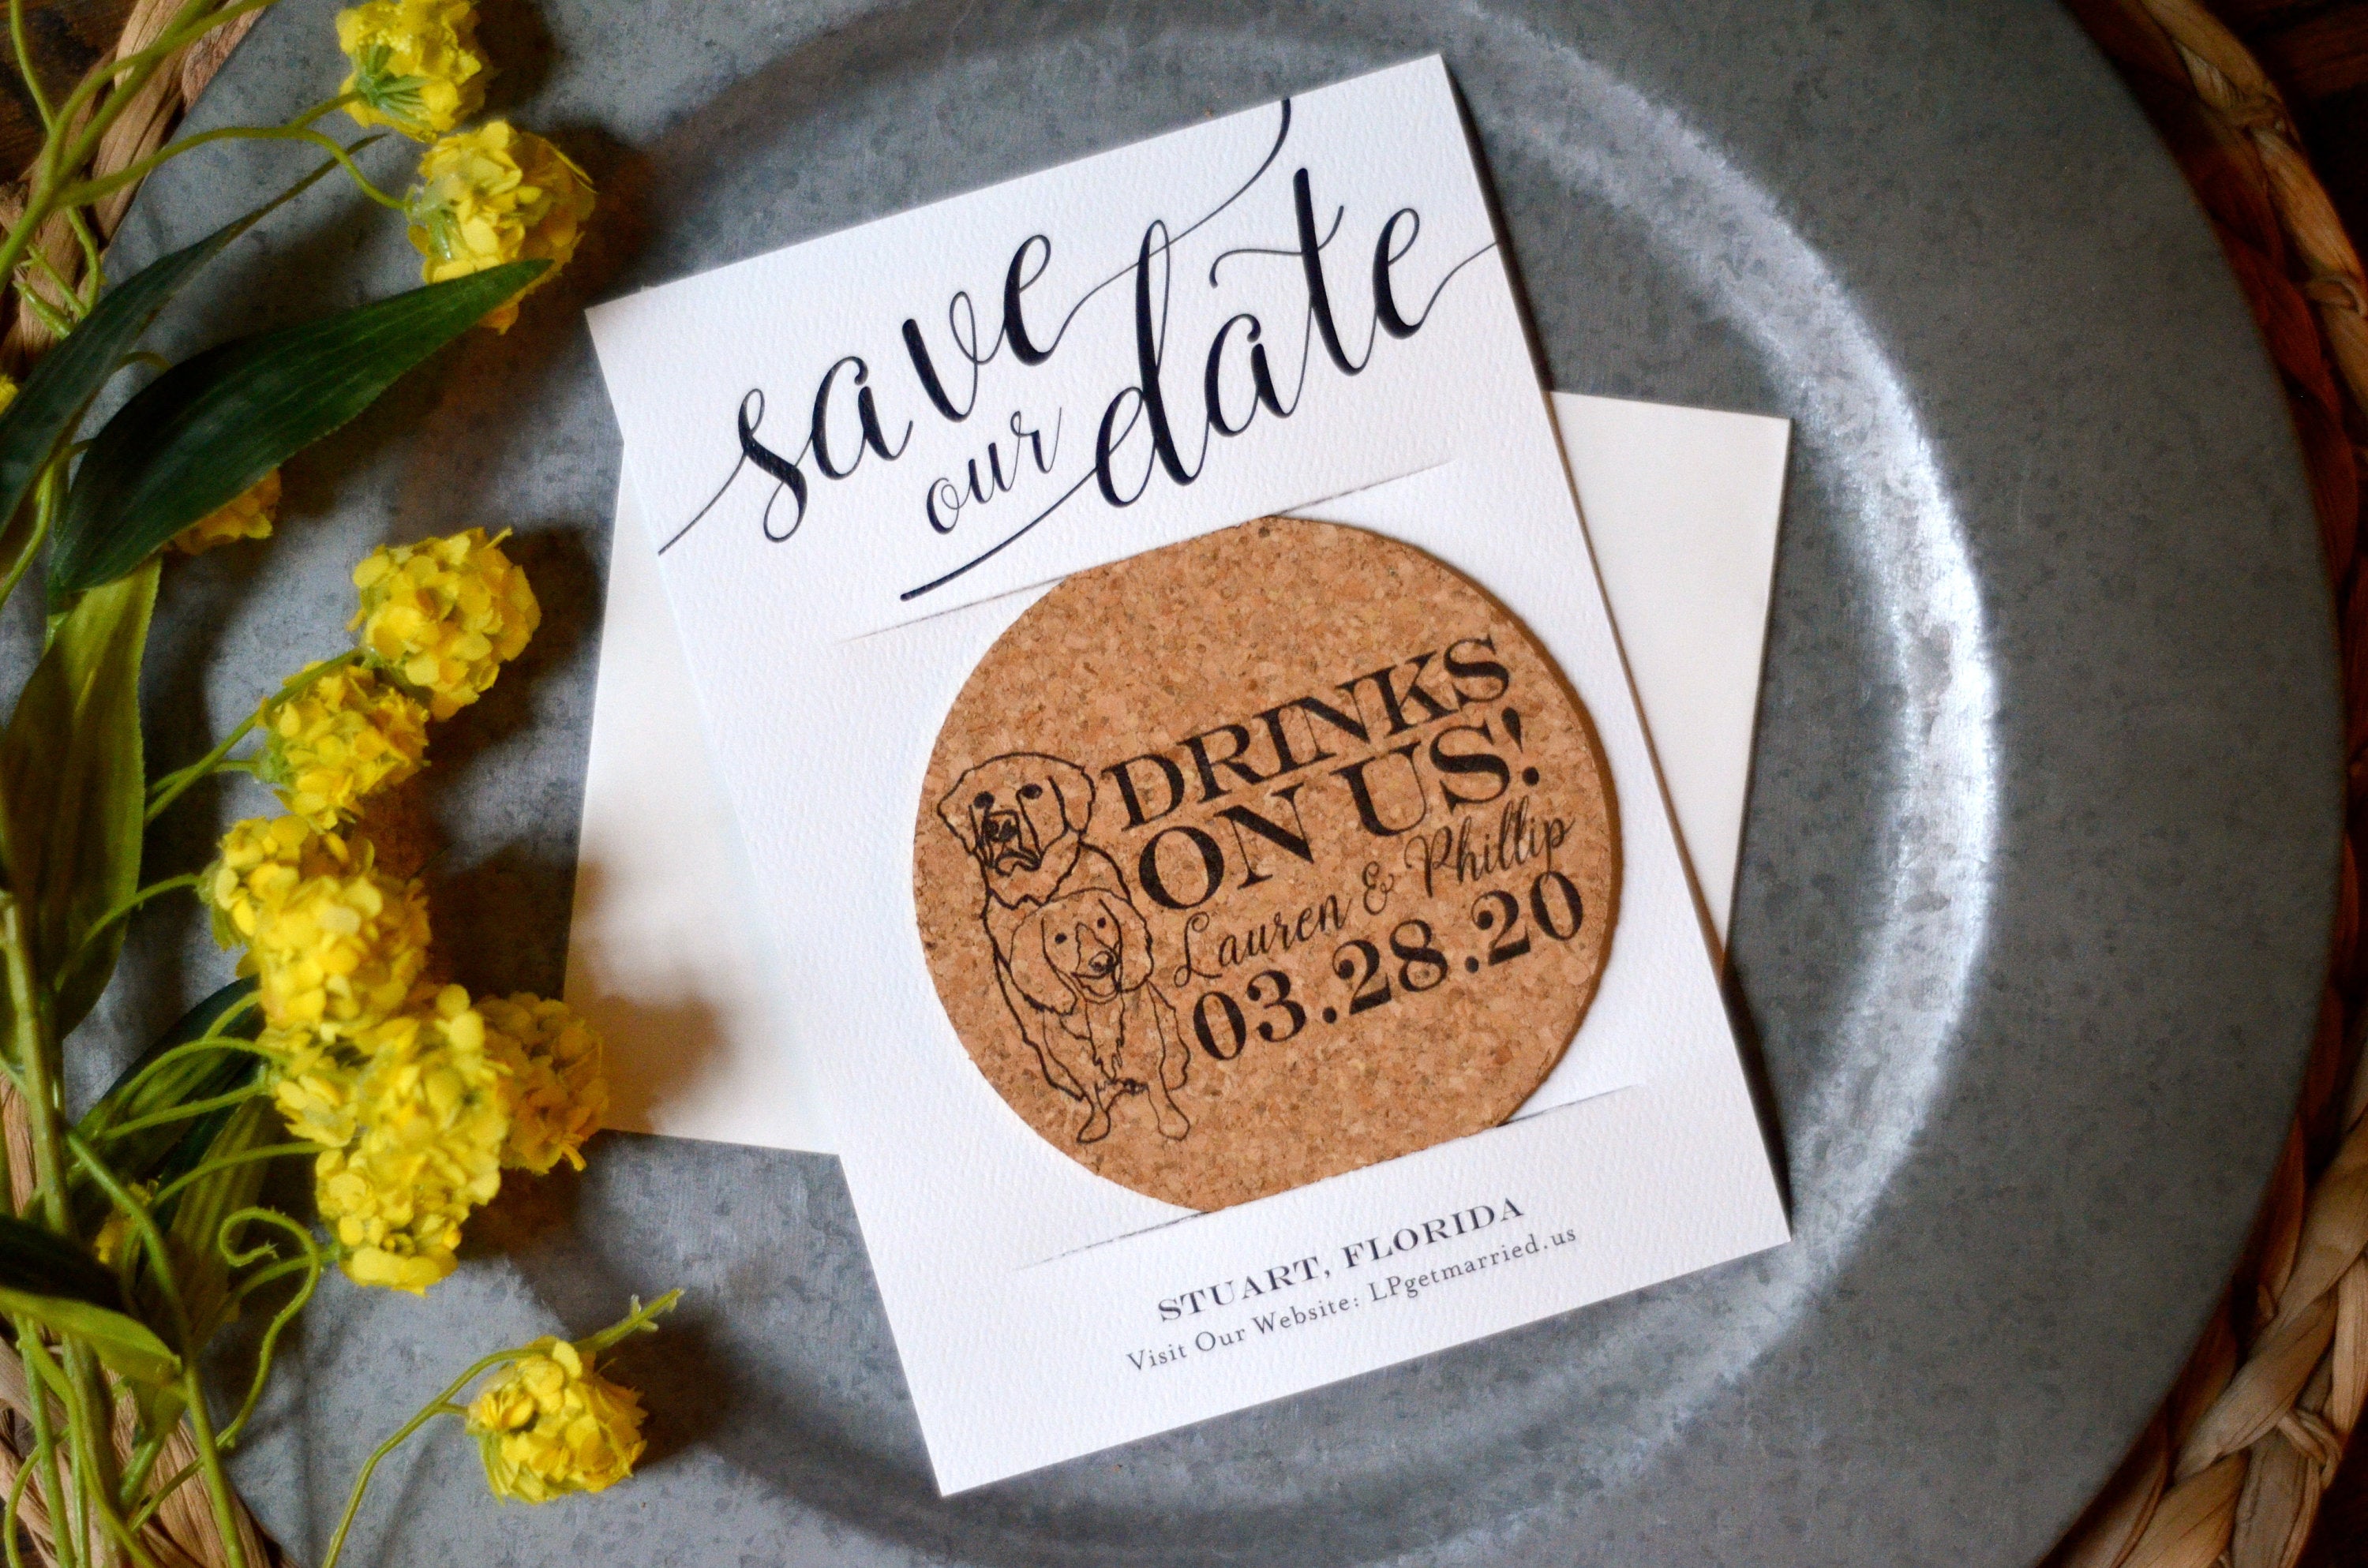 Drinks On Us Dogs Wedding Cork Coaster Save the Date with Photo // Black and Cream Dog Wedding Save the Date with Cork Coaster Favor